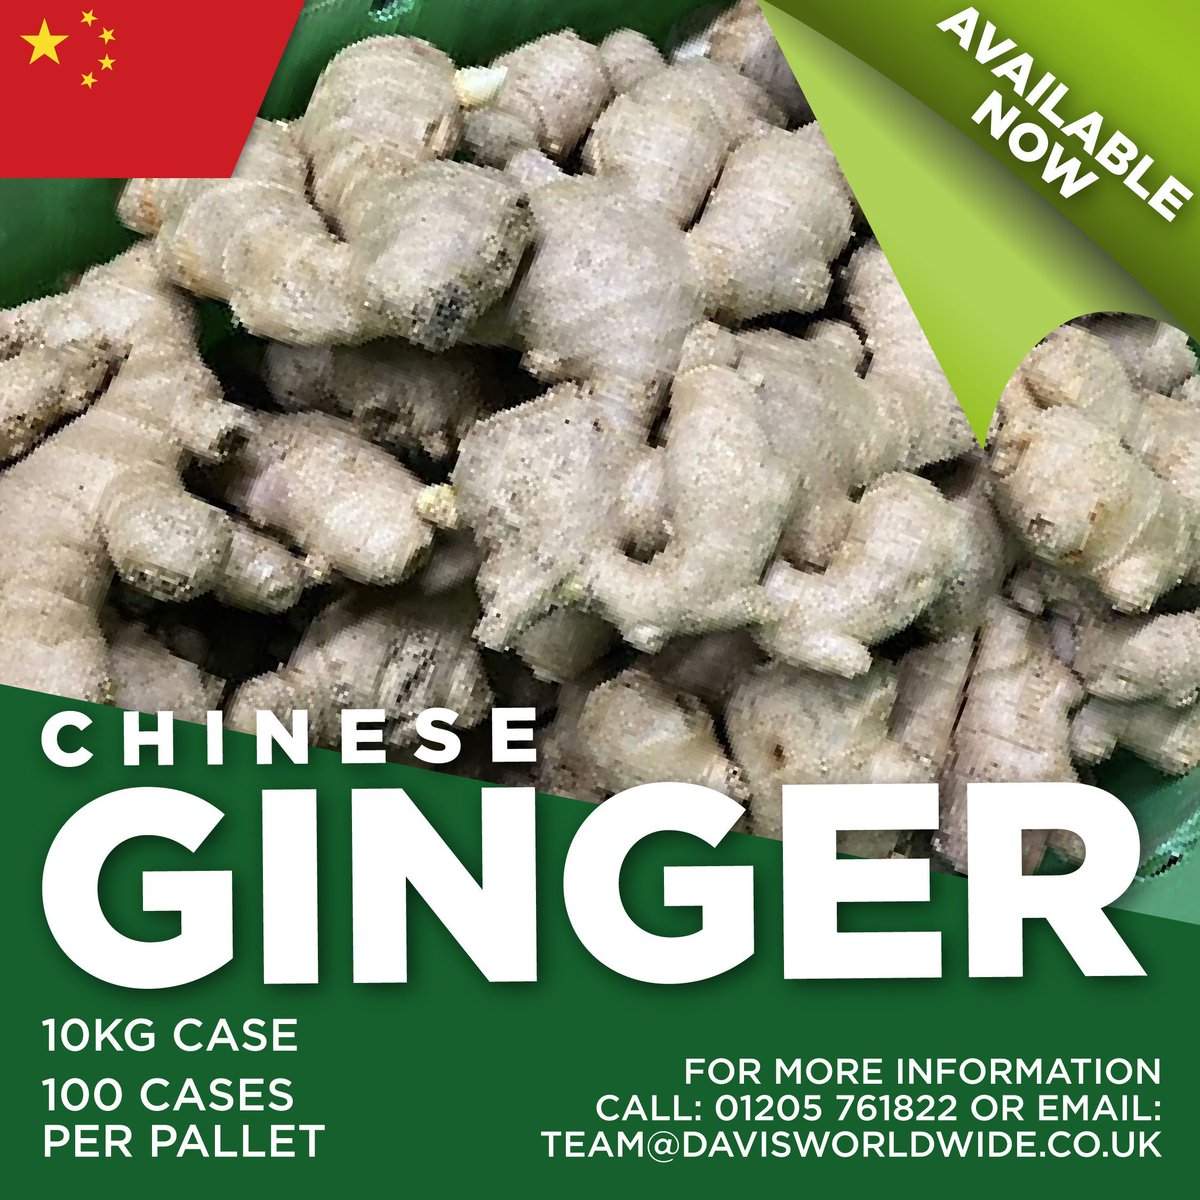 Chinese Root Ginger is now available. The spicy root is used in various foods, drinks and remedies

Enquire today. Call our team on 01205 761822 or mail team@davisworldwide.co.uk

#ginger #freshginger #gingerroot #rootginger #spices #asian#asiancuisine #herbal #spicy #spiceoflife